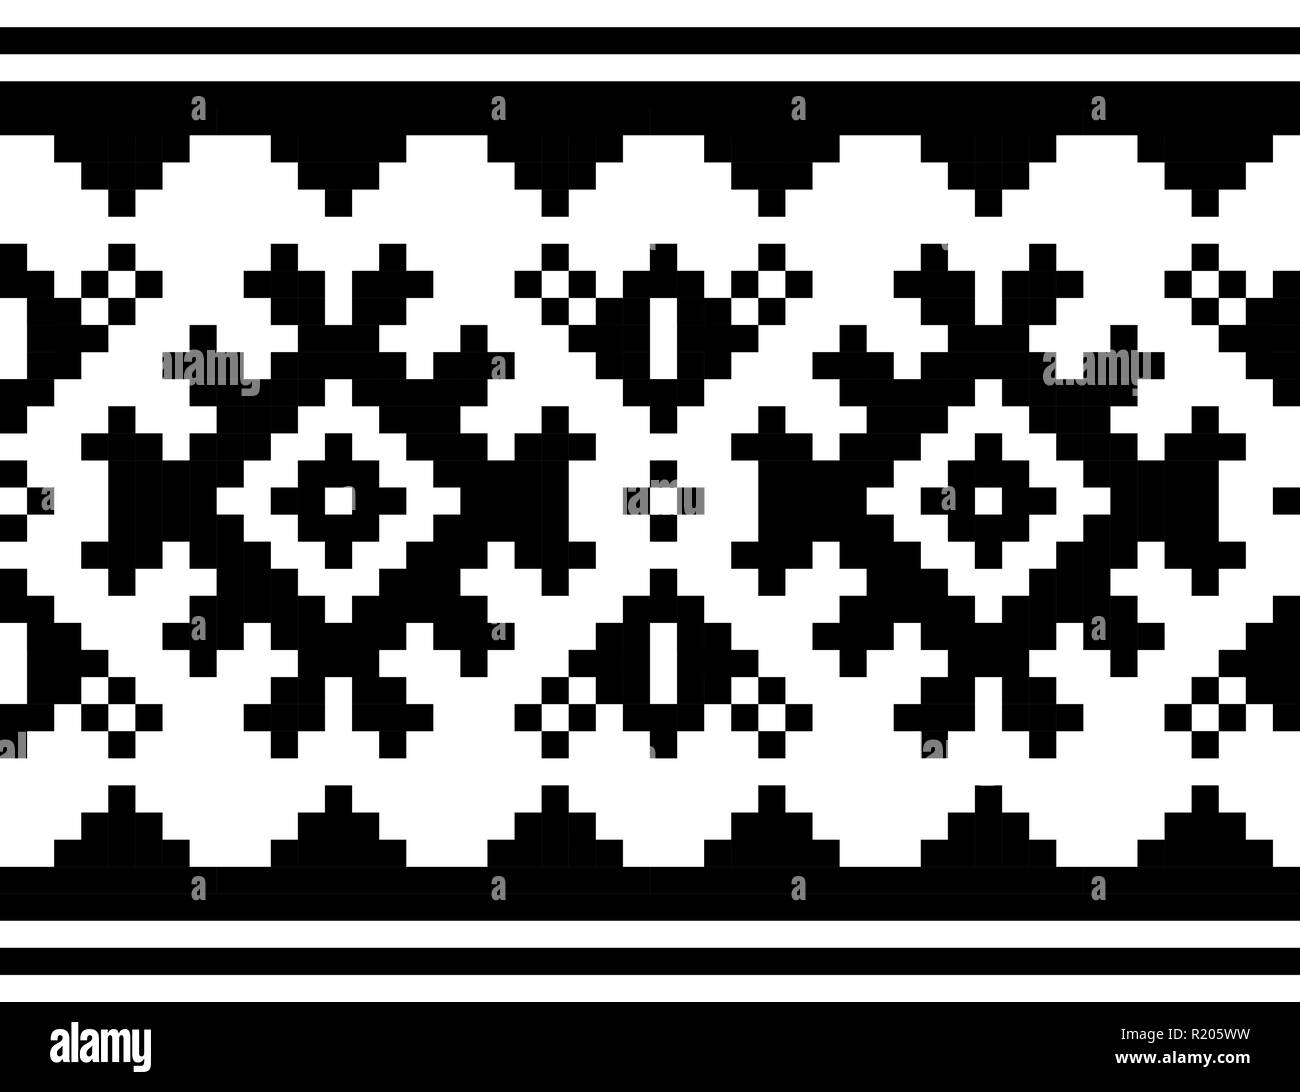 Winter vector pattern - Sami people traditional cross-stitch embroidery design, Scandinavian folk art - black and white Stock Vector